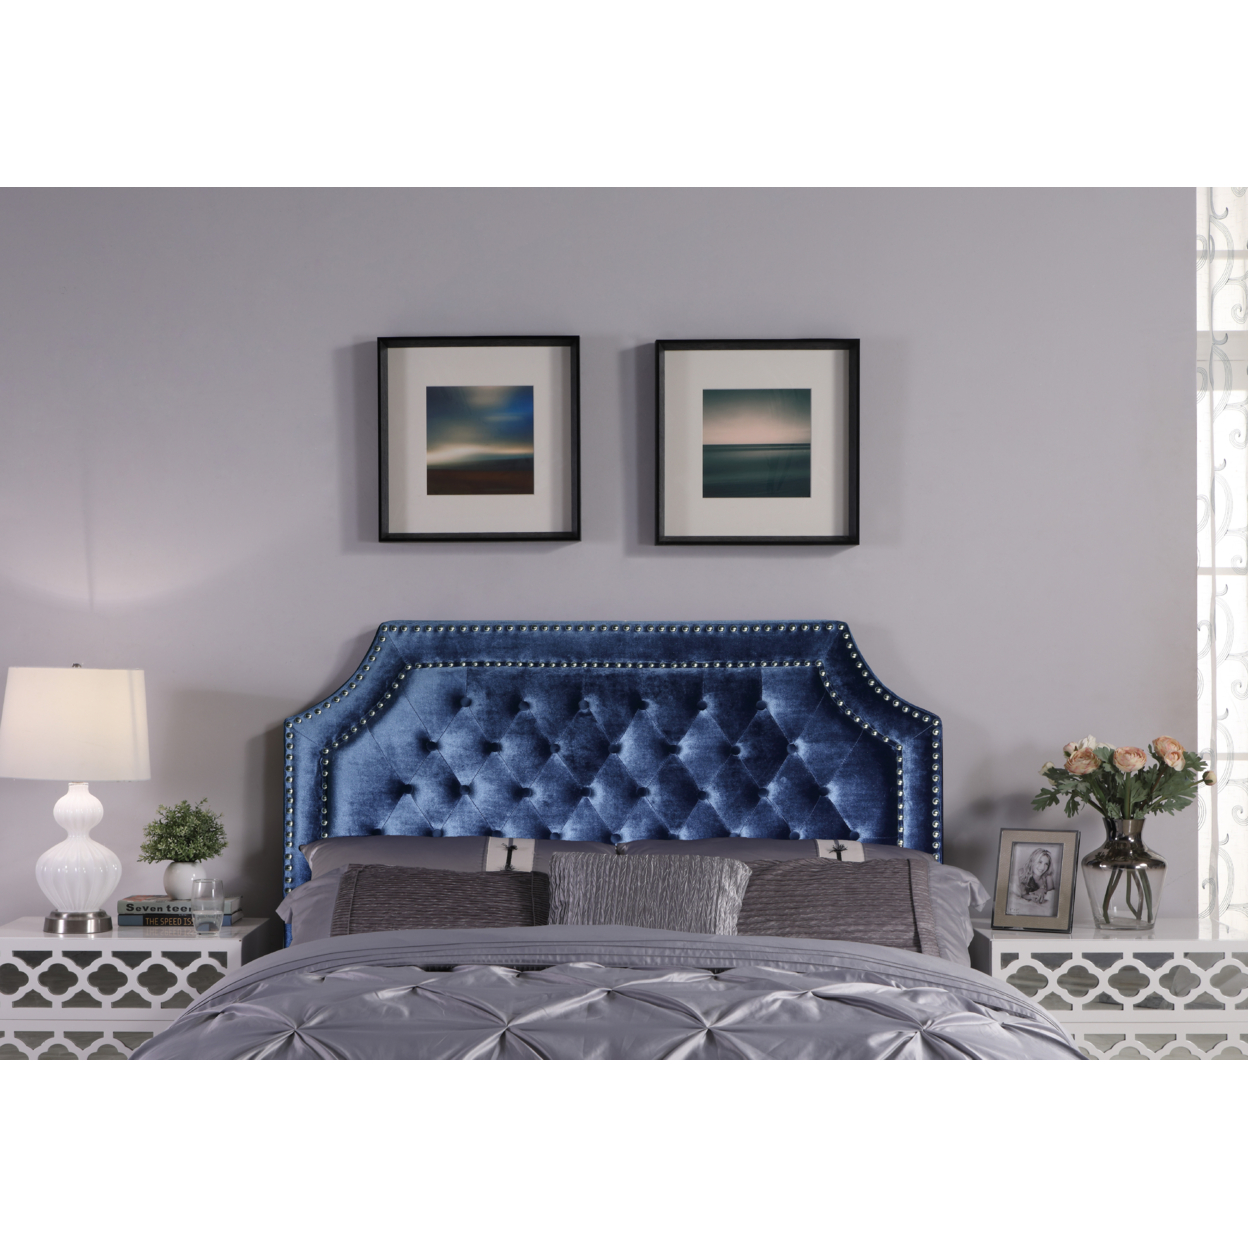 Horus Headboard Velvet Upholstered Button Tufted Double Row Silver Nailhead Trim - Taupe, King